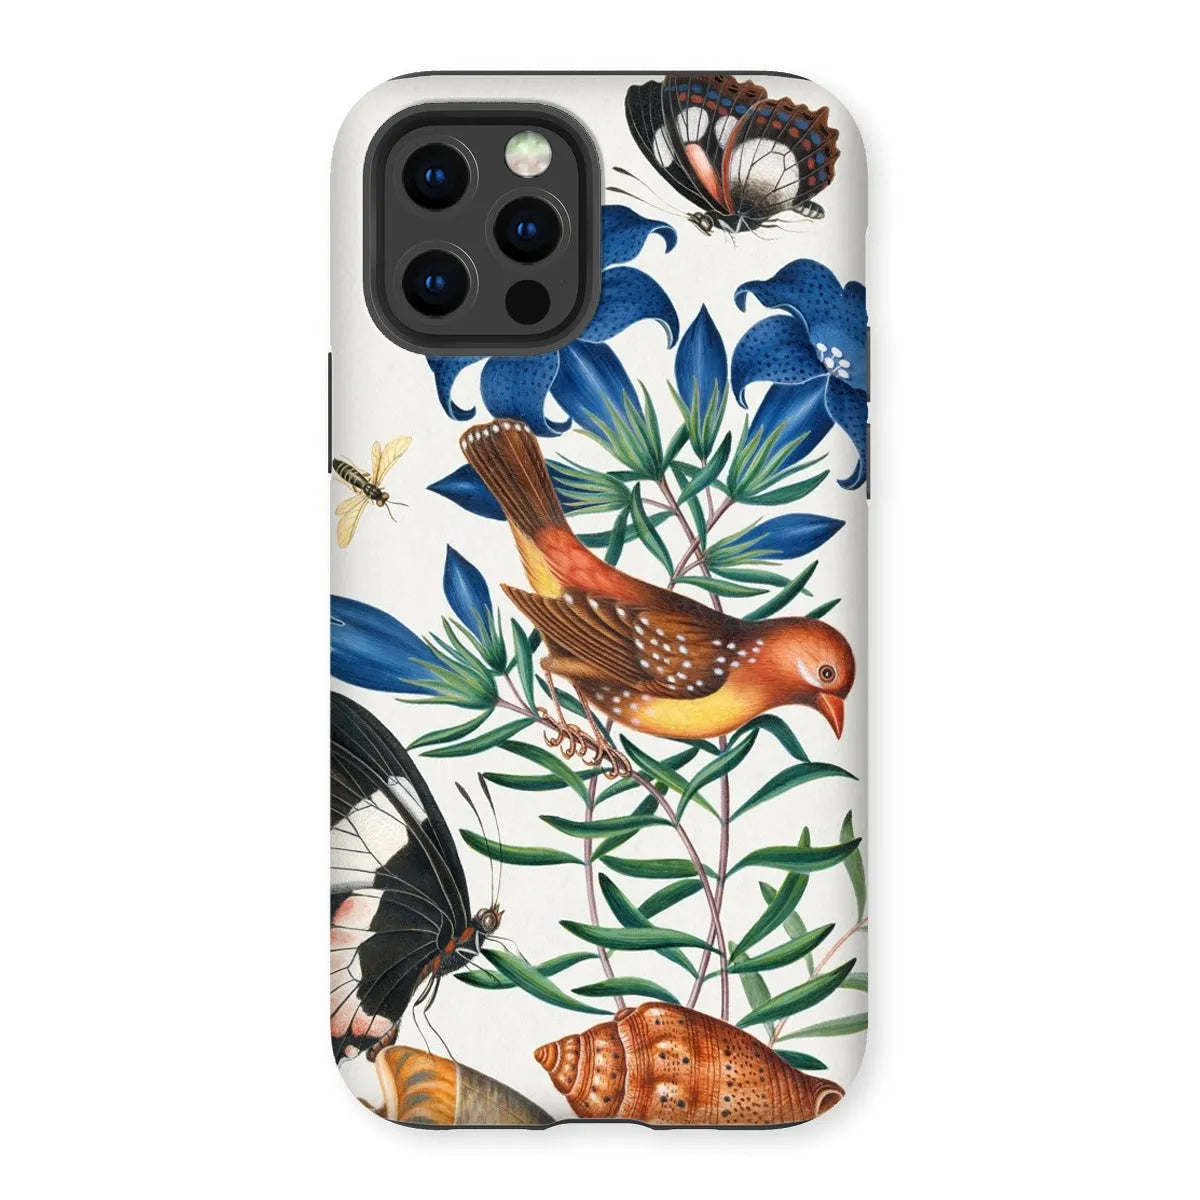 Avadavat Gentian Sawfly Swallowtail And Shells Phone Case - James Bolton - Iphone 12 Pro / Matte - Mobile Phone Cases